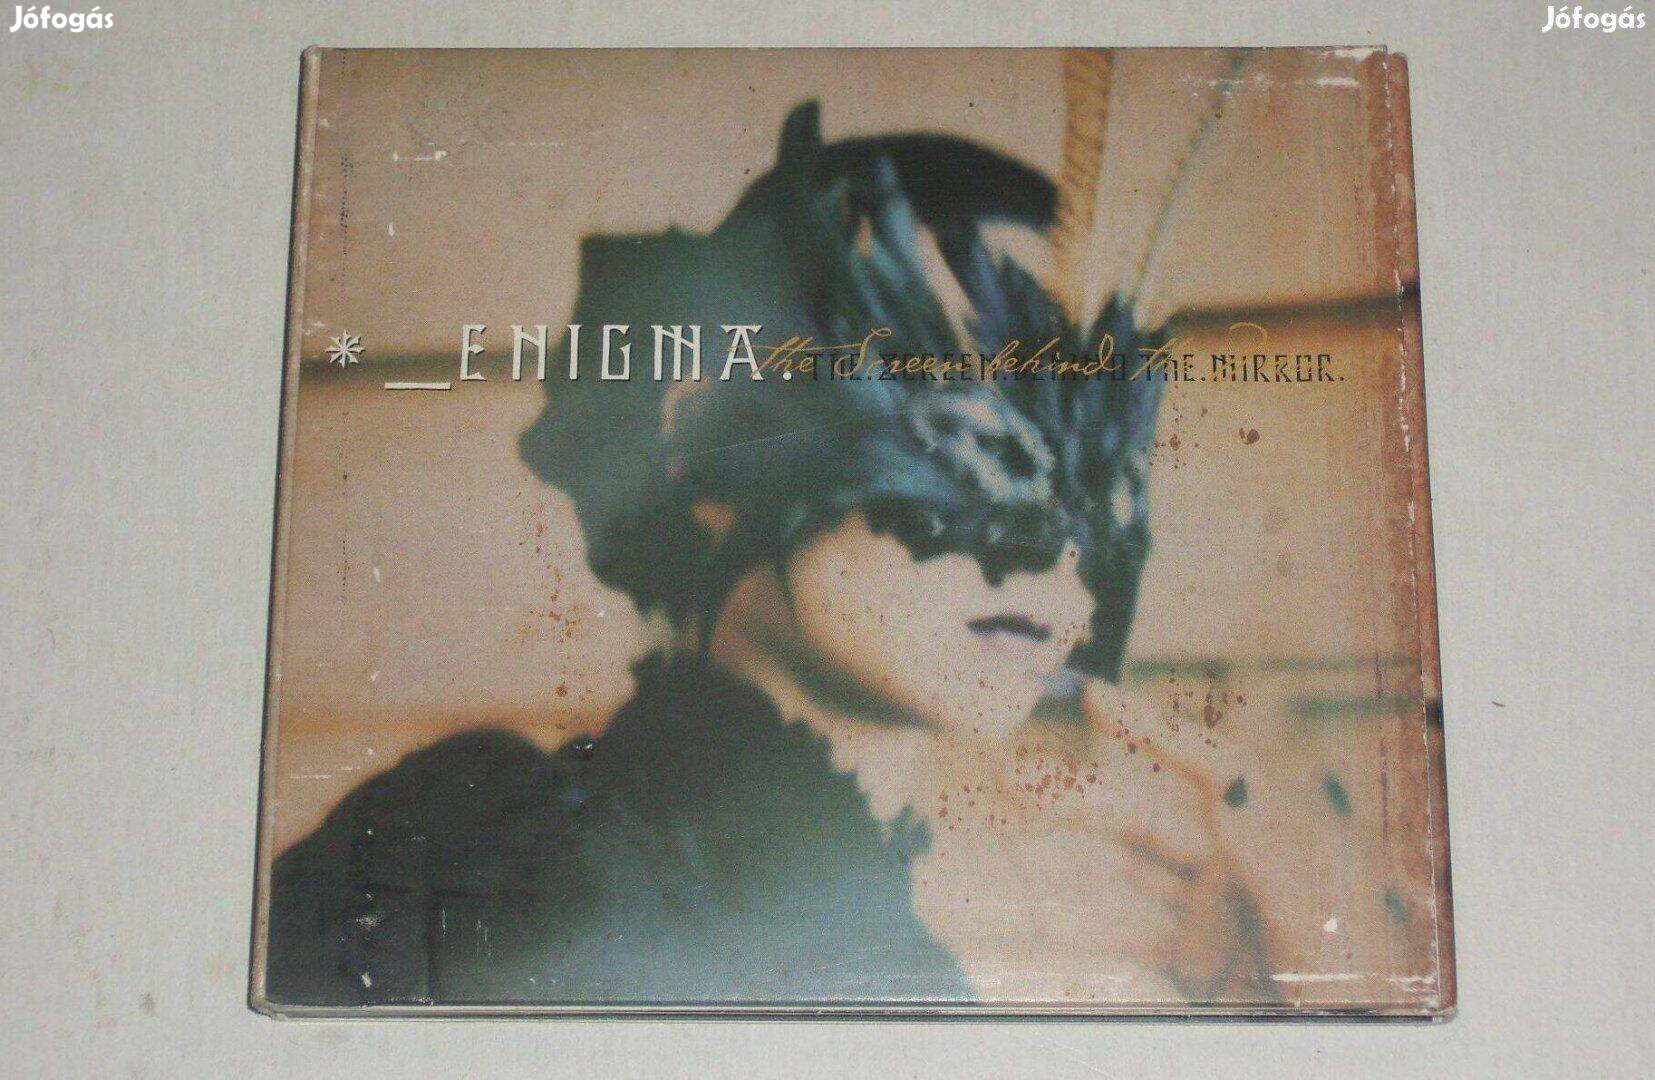 Enigma - The Screen Behind The Mirror CD